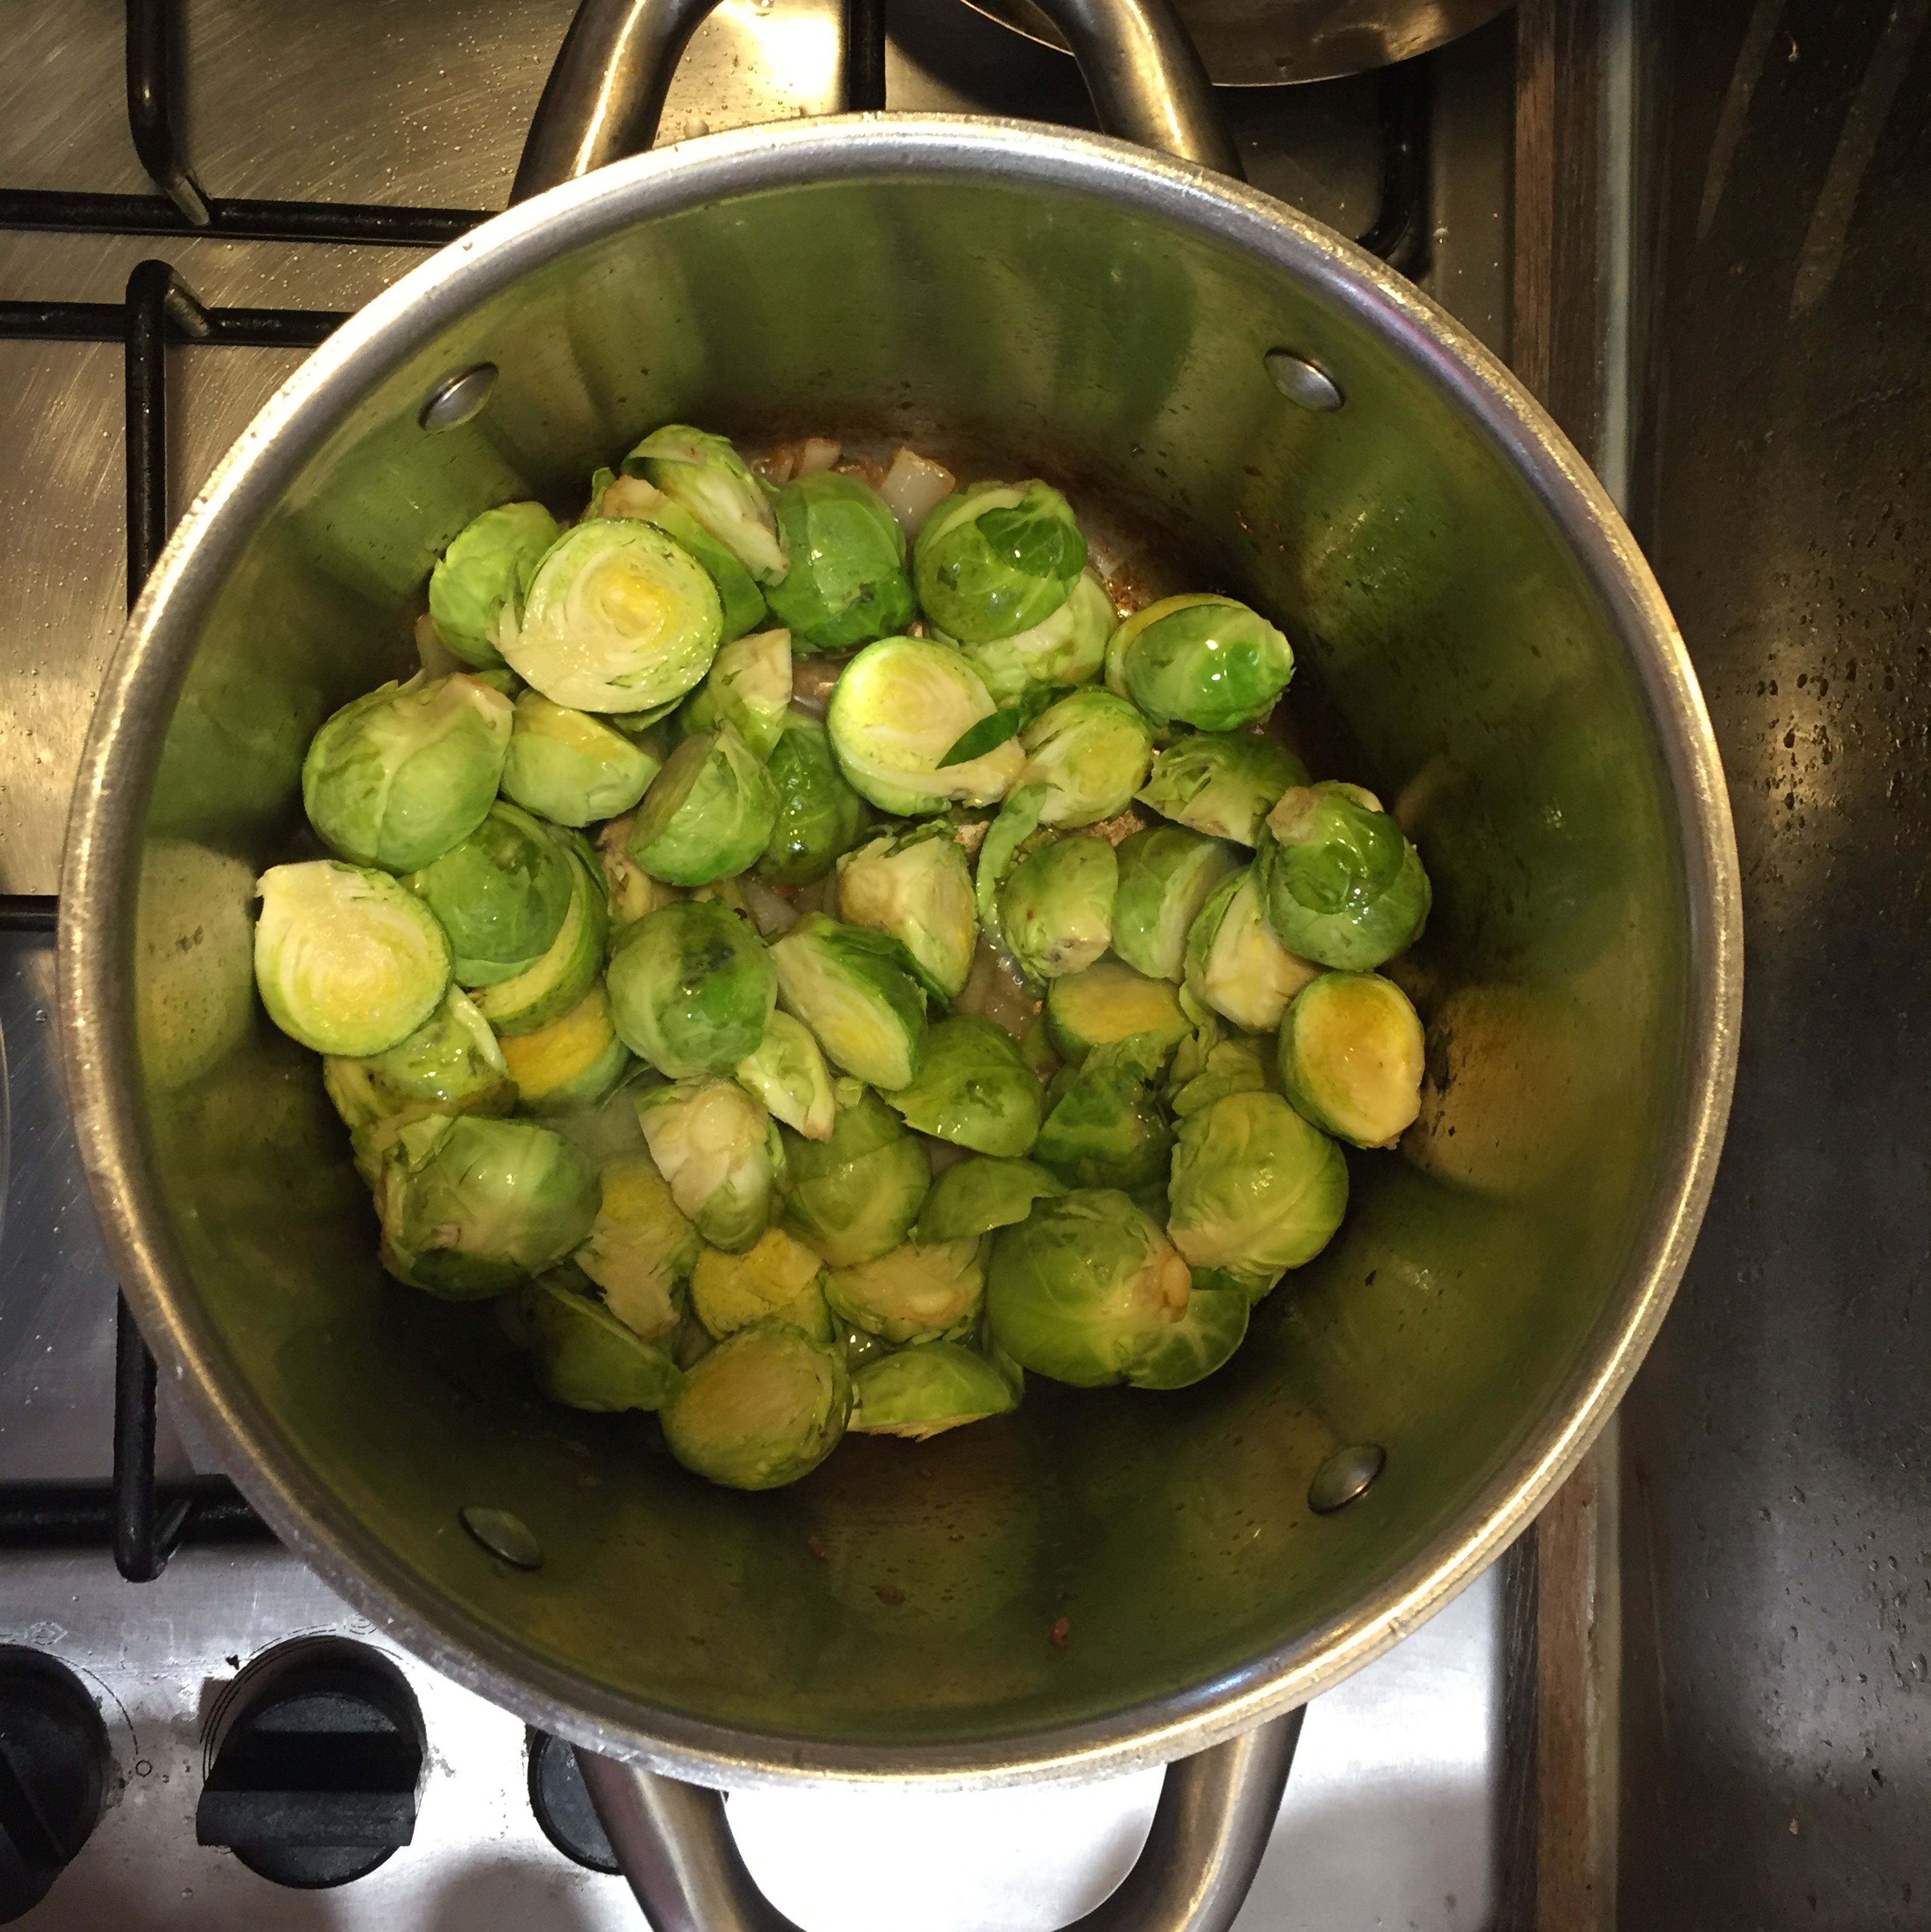 Without removing the onions, fry the brussel sprouts for 5 minutes on high till it’s cooked